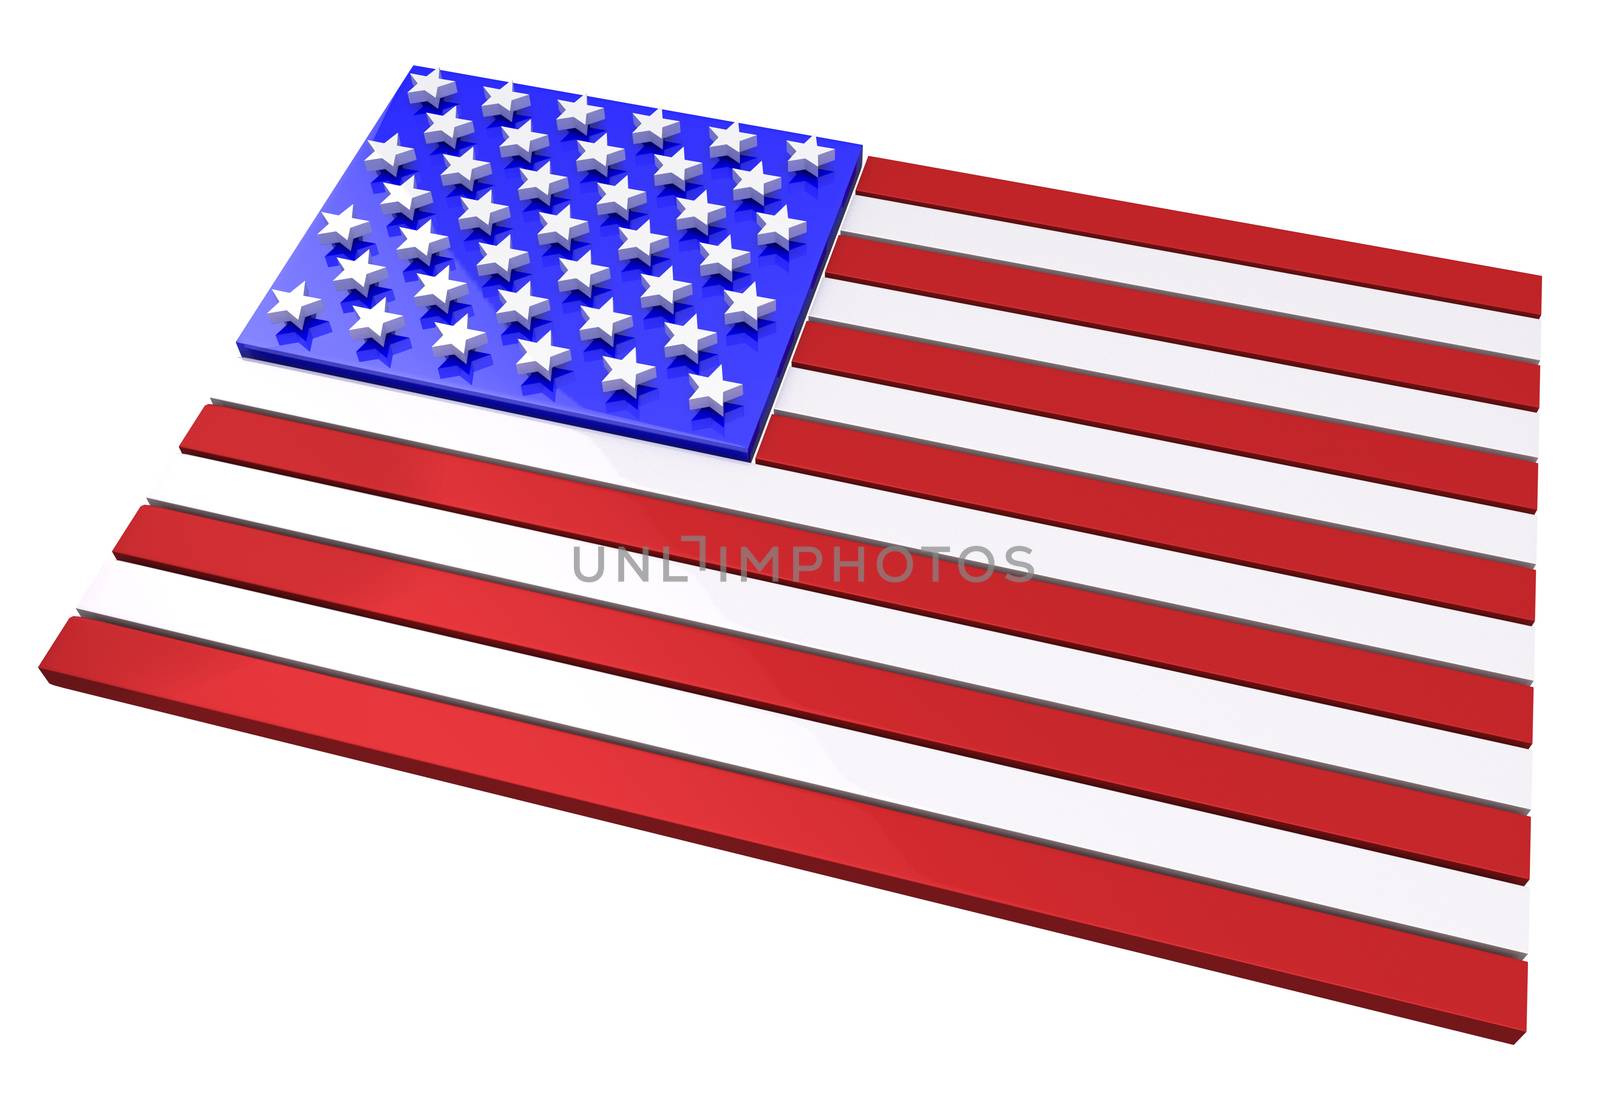 3D model of an American flag in relief against white